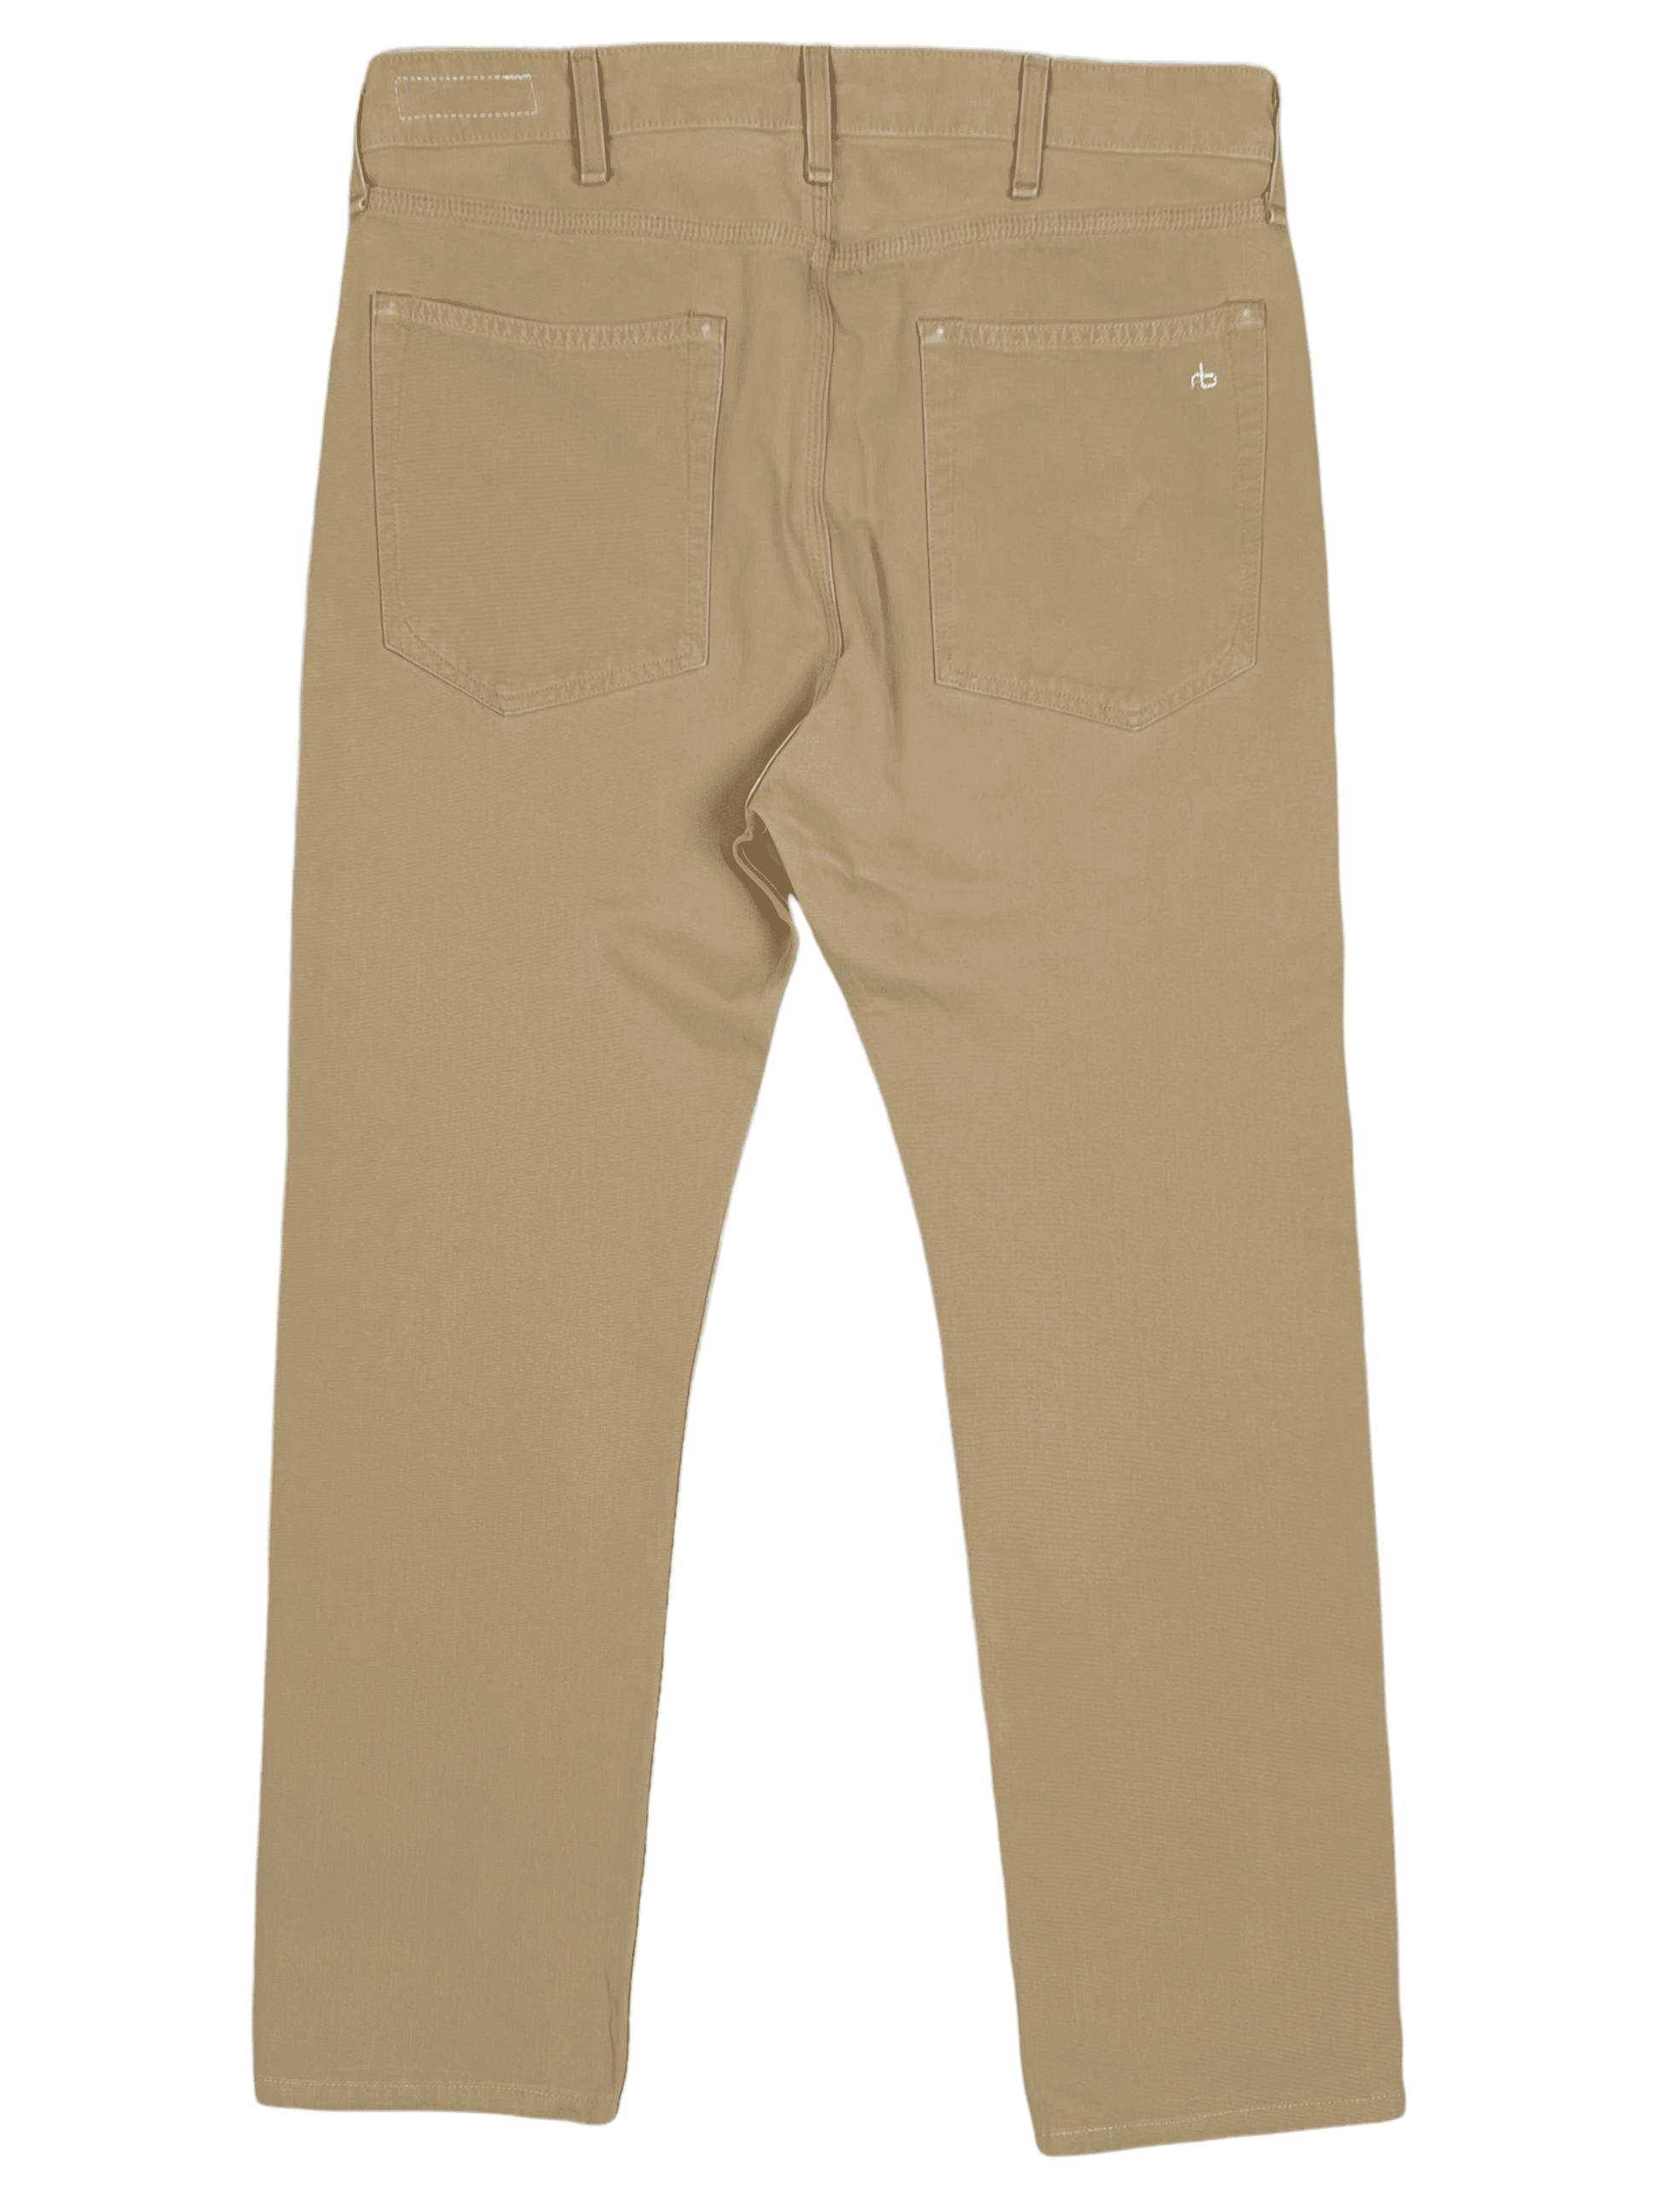 Rag & Bone Beige Jeans 34 x 30 - Genuine Design Luxury Consignment for Men. New & Pre-Owned Clothing, Shoes, & Accessories. Calgary, Canada